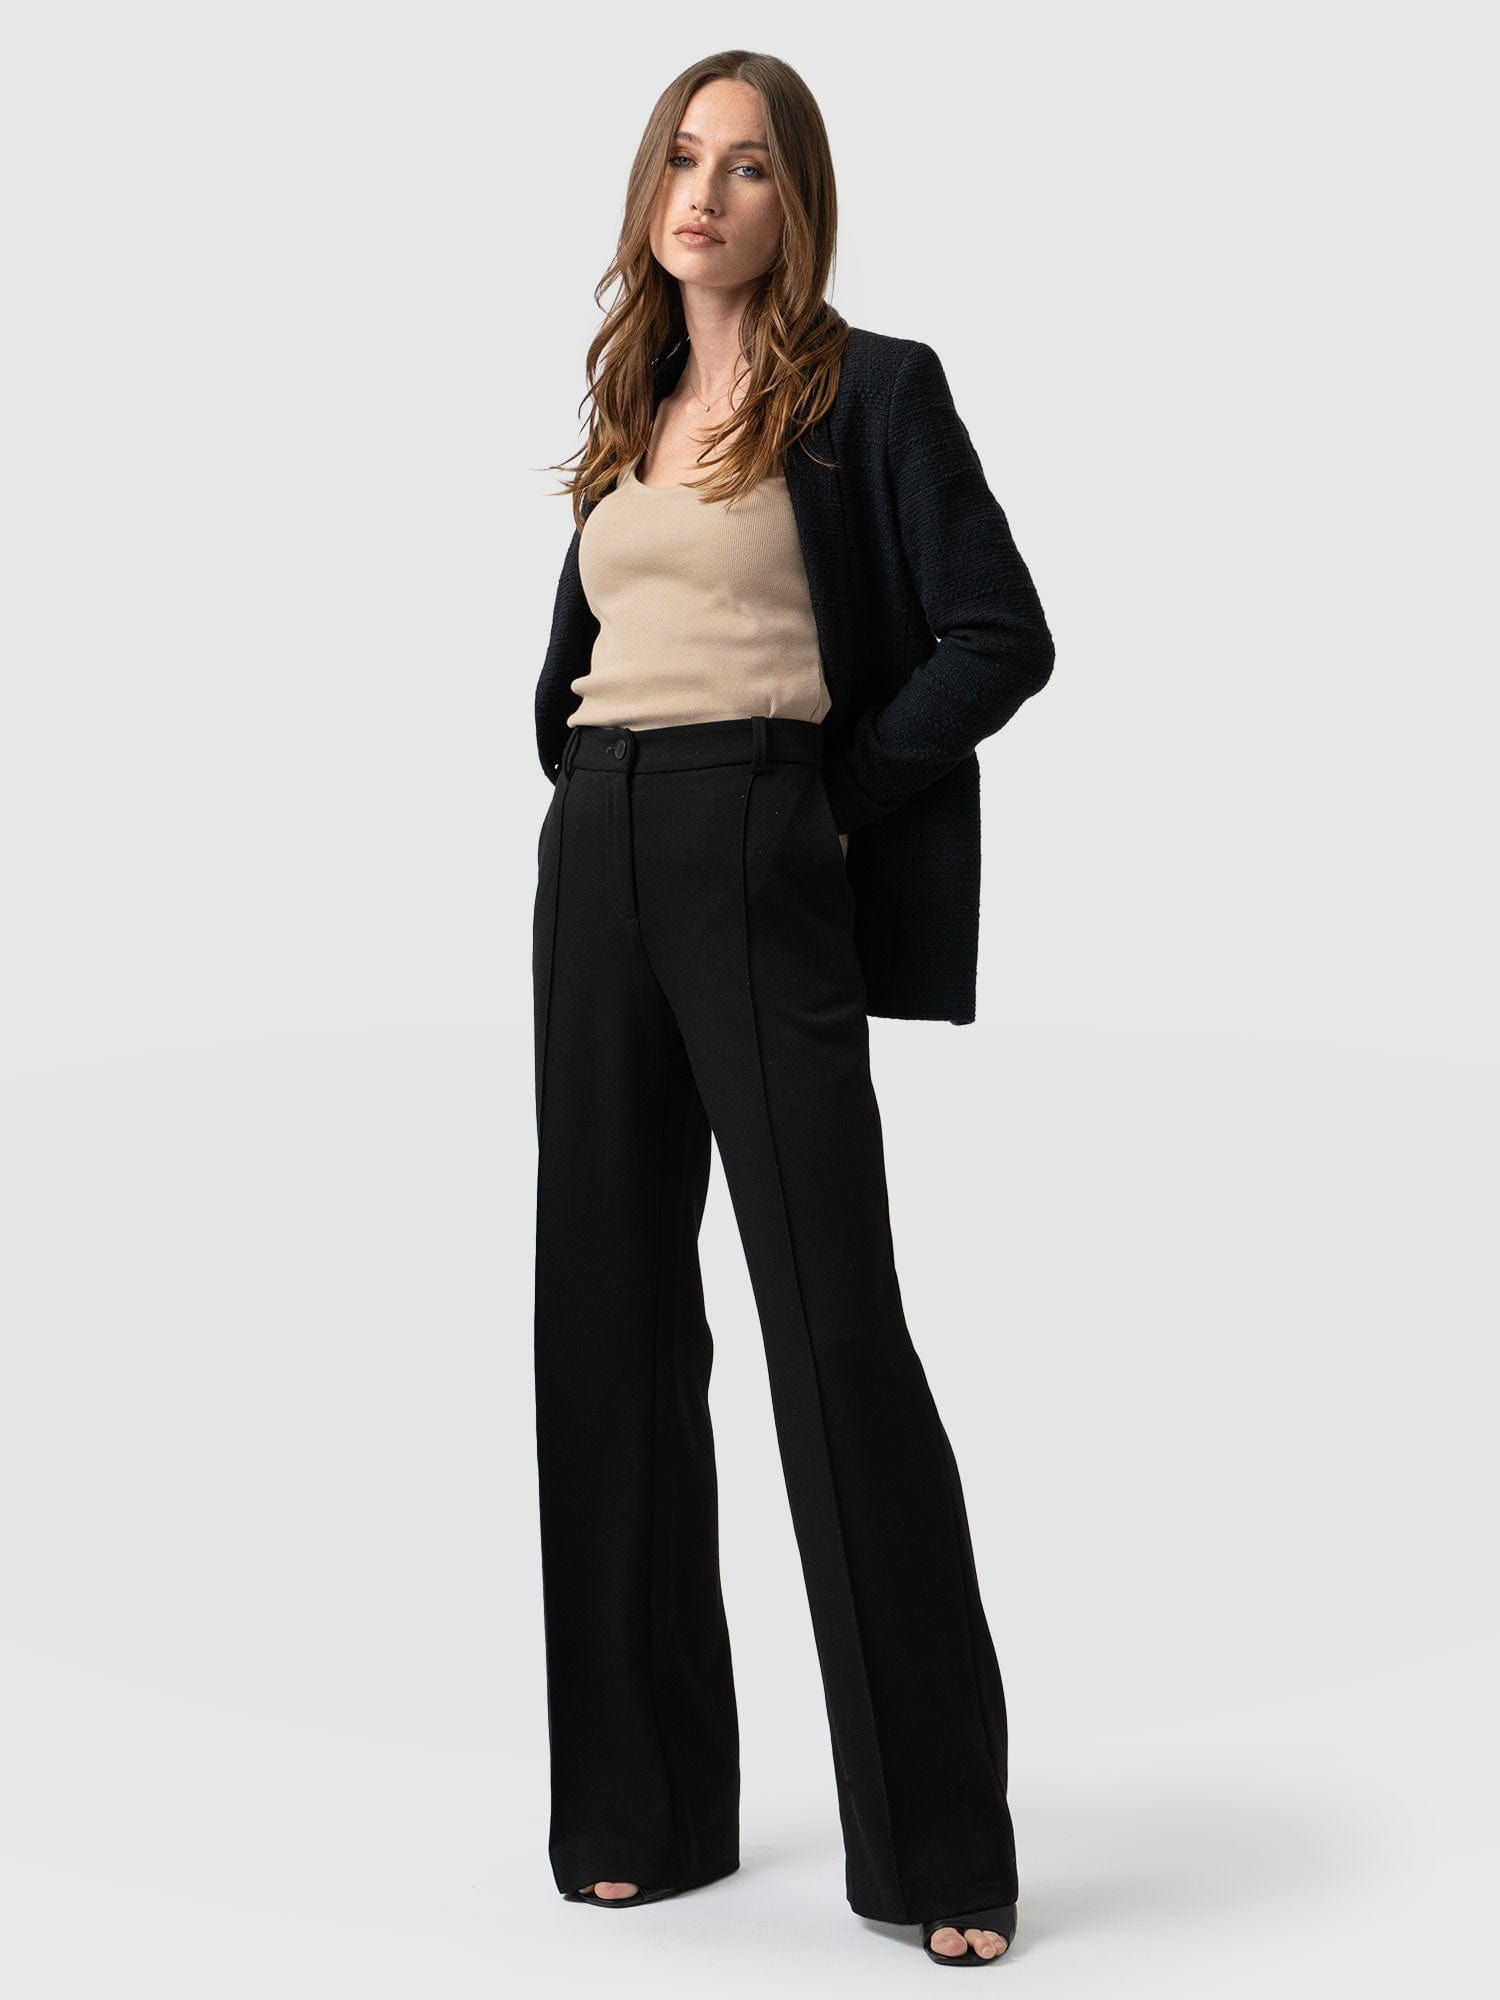 Black Tailored Trousers by Róhe on Sale